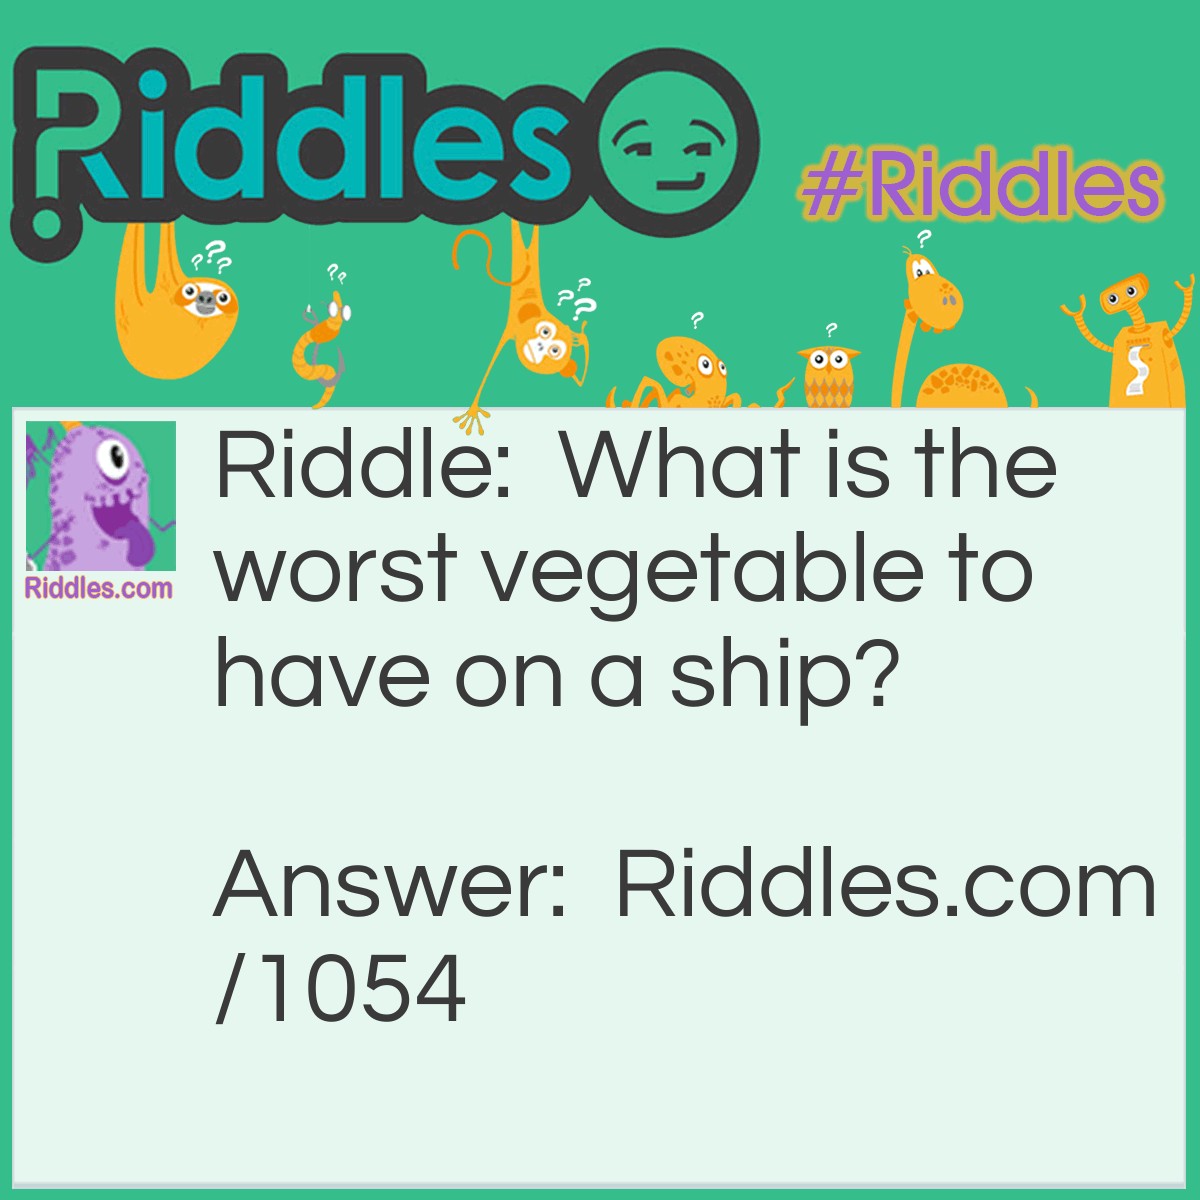 Riddle: What is the worst vegetable to have on a ship? Answer: A Leek.